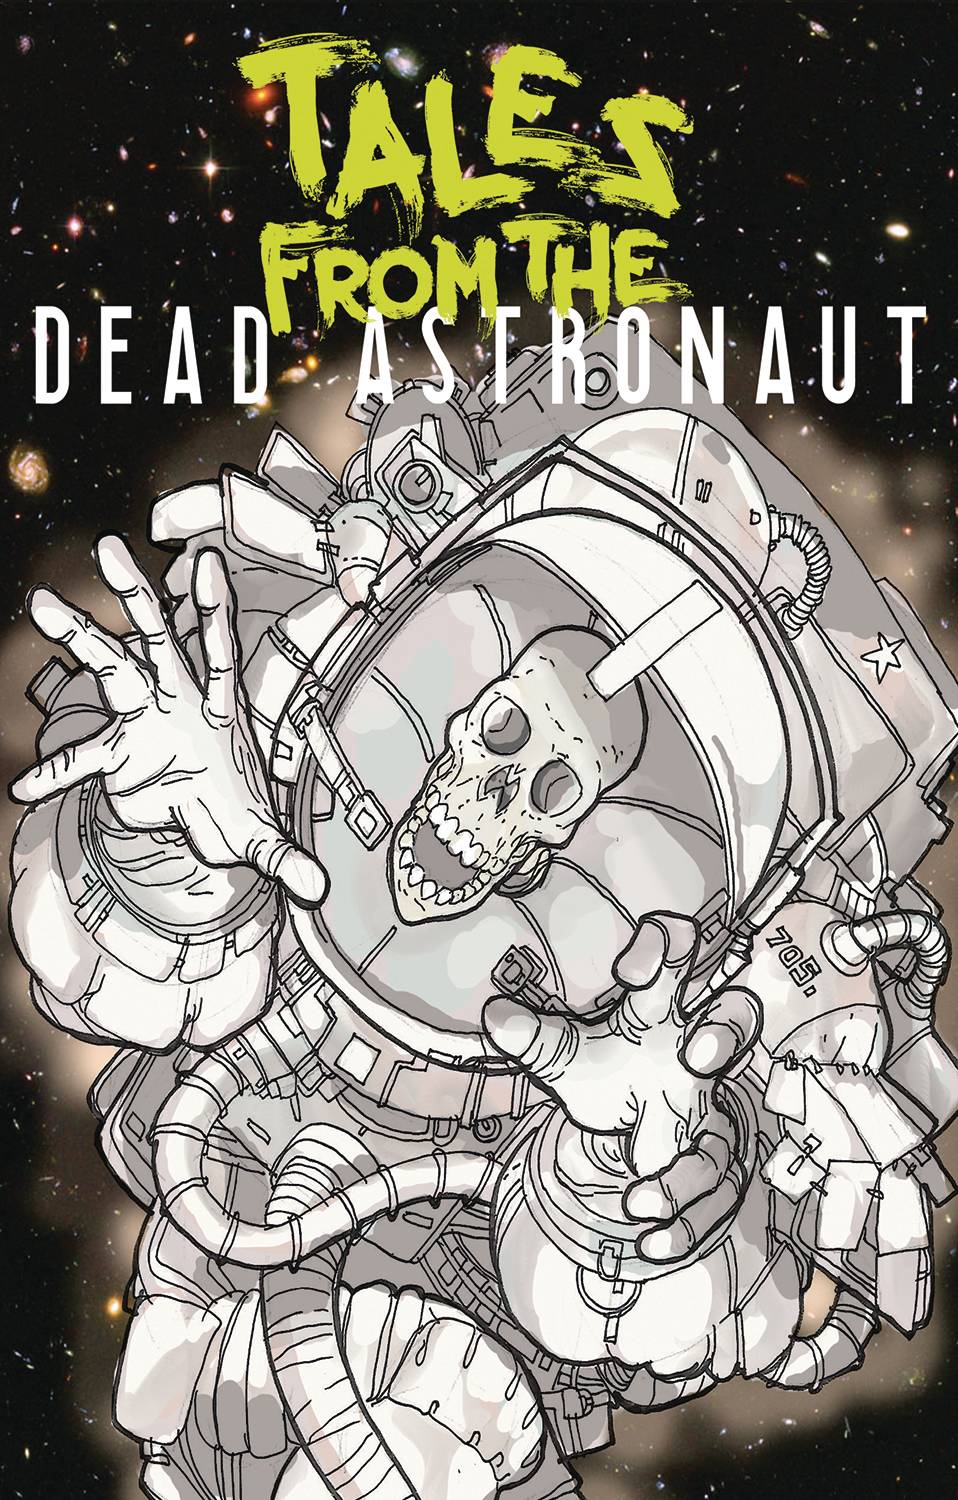 TALES FROM THE DEAD ASTRONAUT #1 (OF 3) 💎🤮